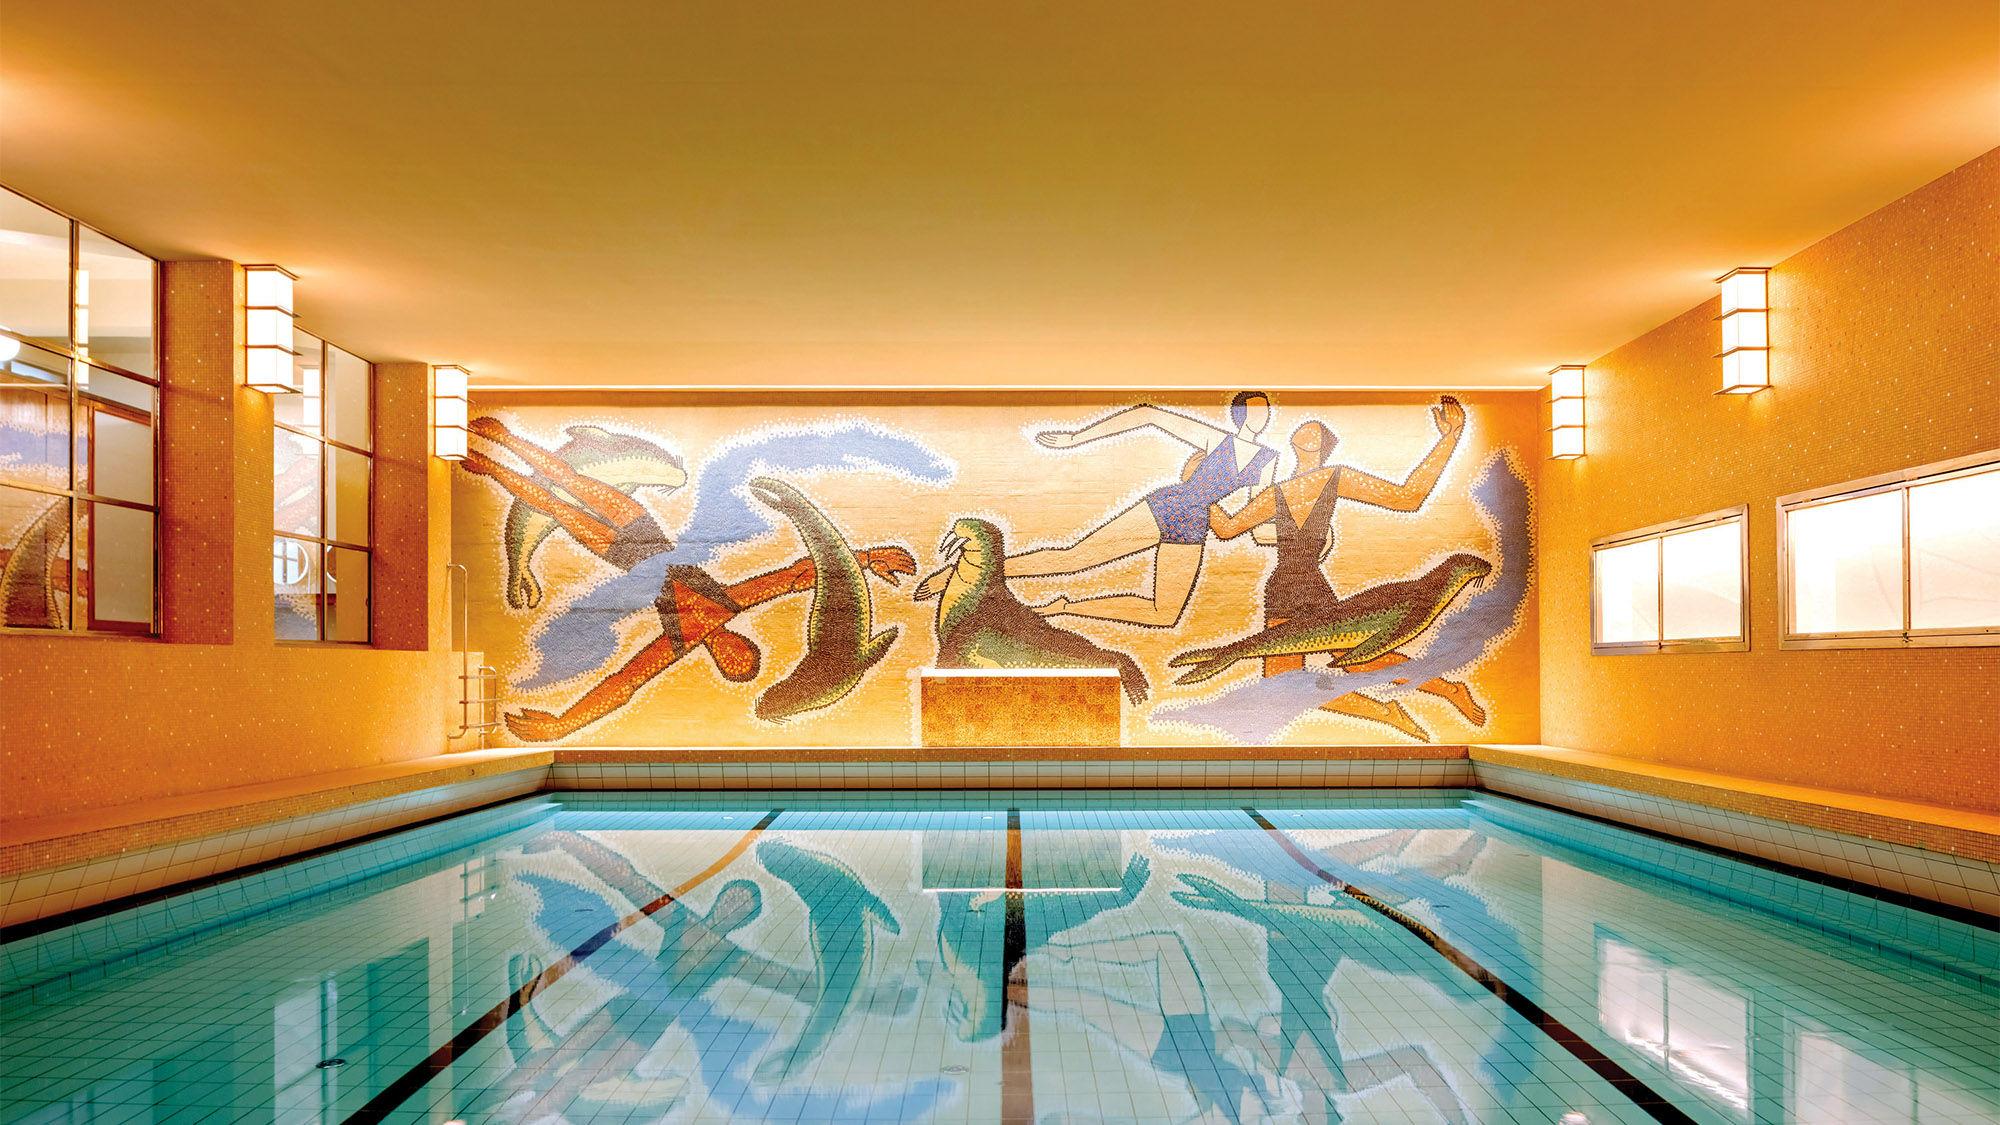 Vestkantbadet's art deco swimming pool is notable for its mural by Per Krohg.